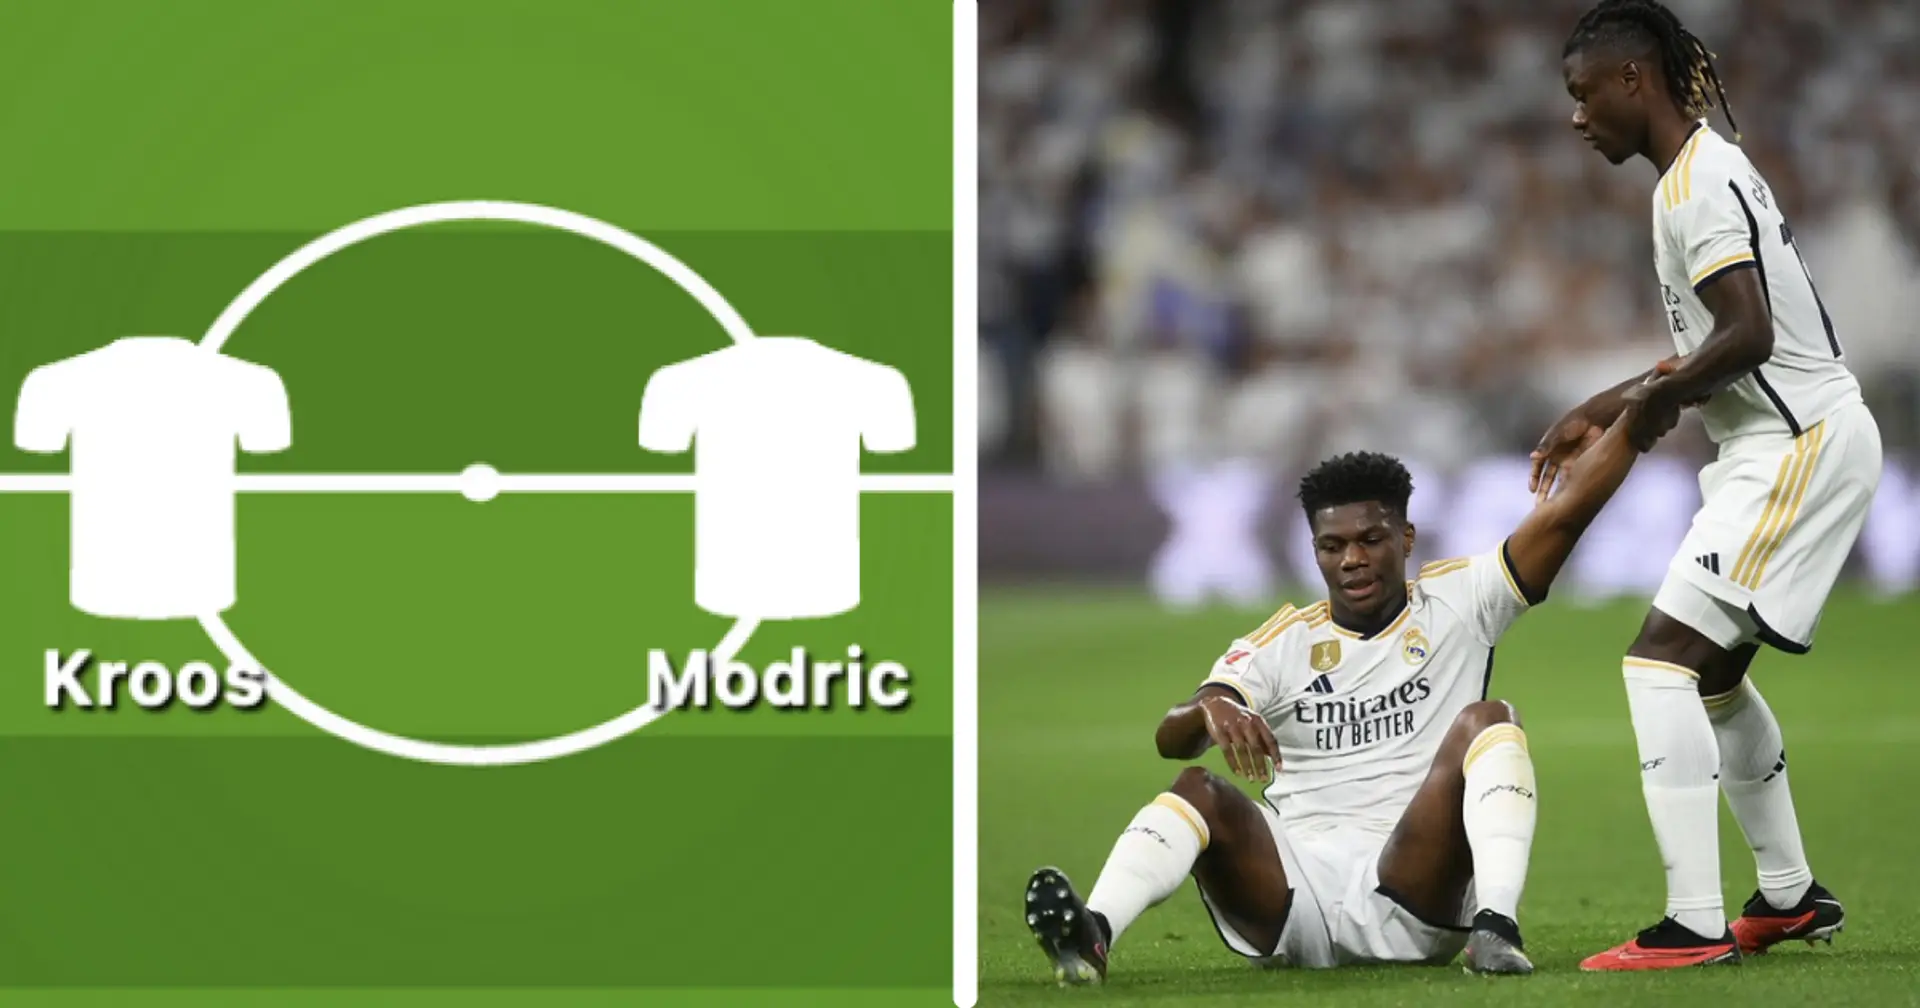 Who should start in midfield against Getafe?